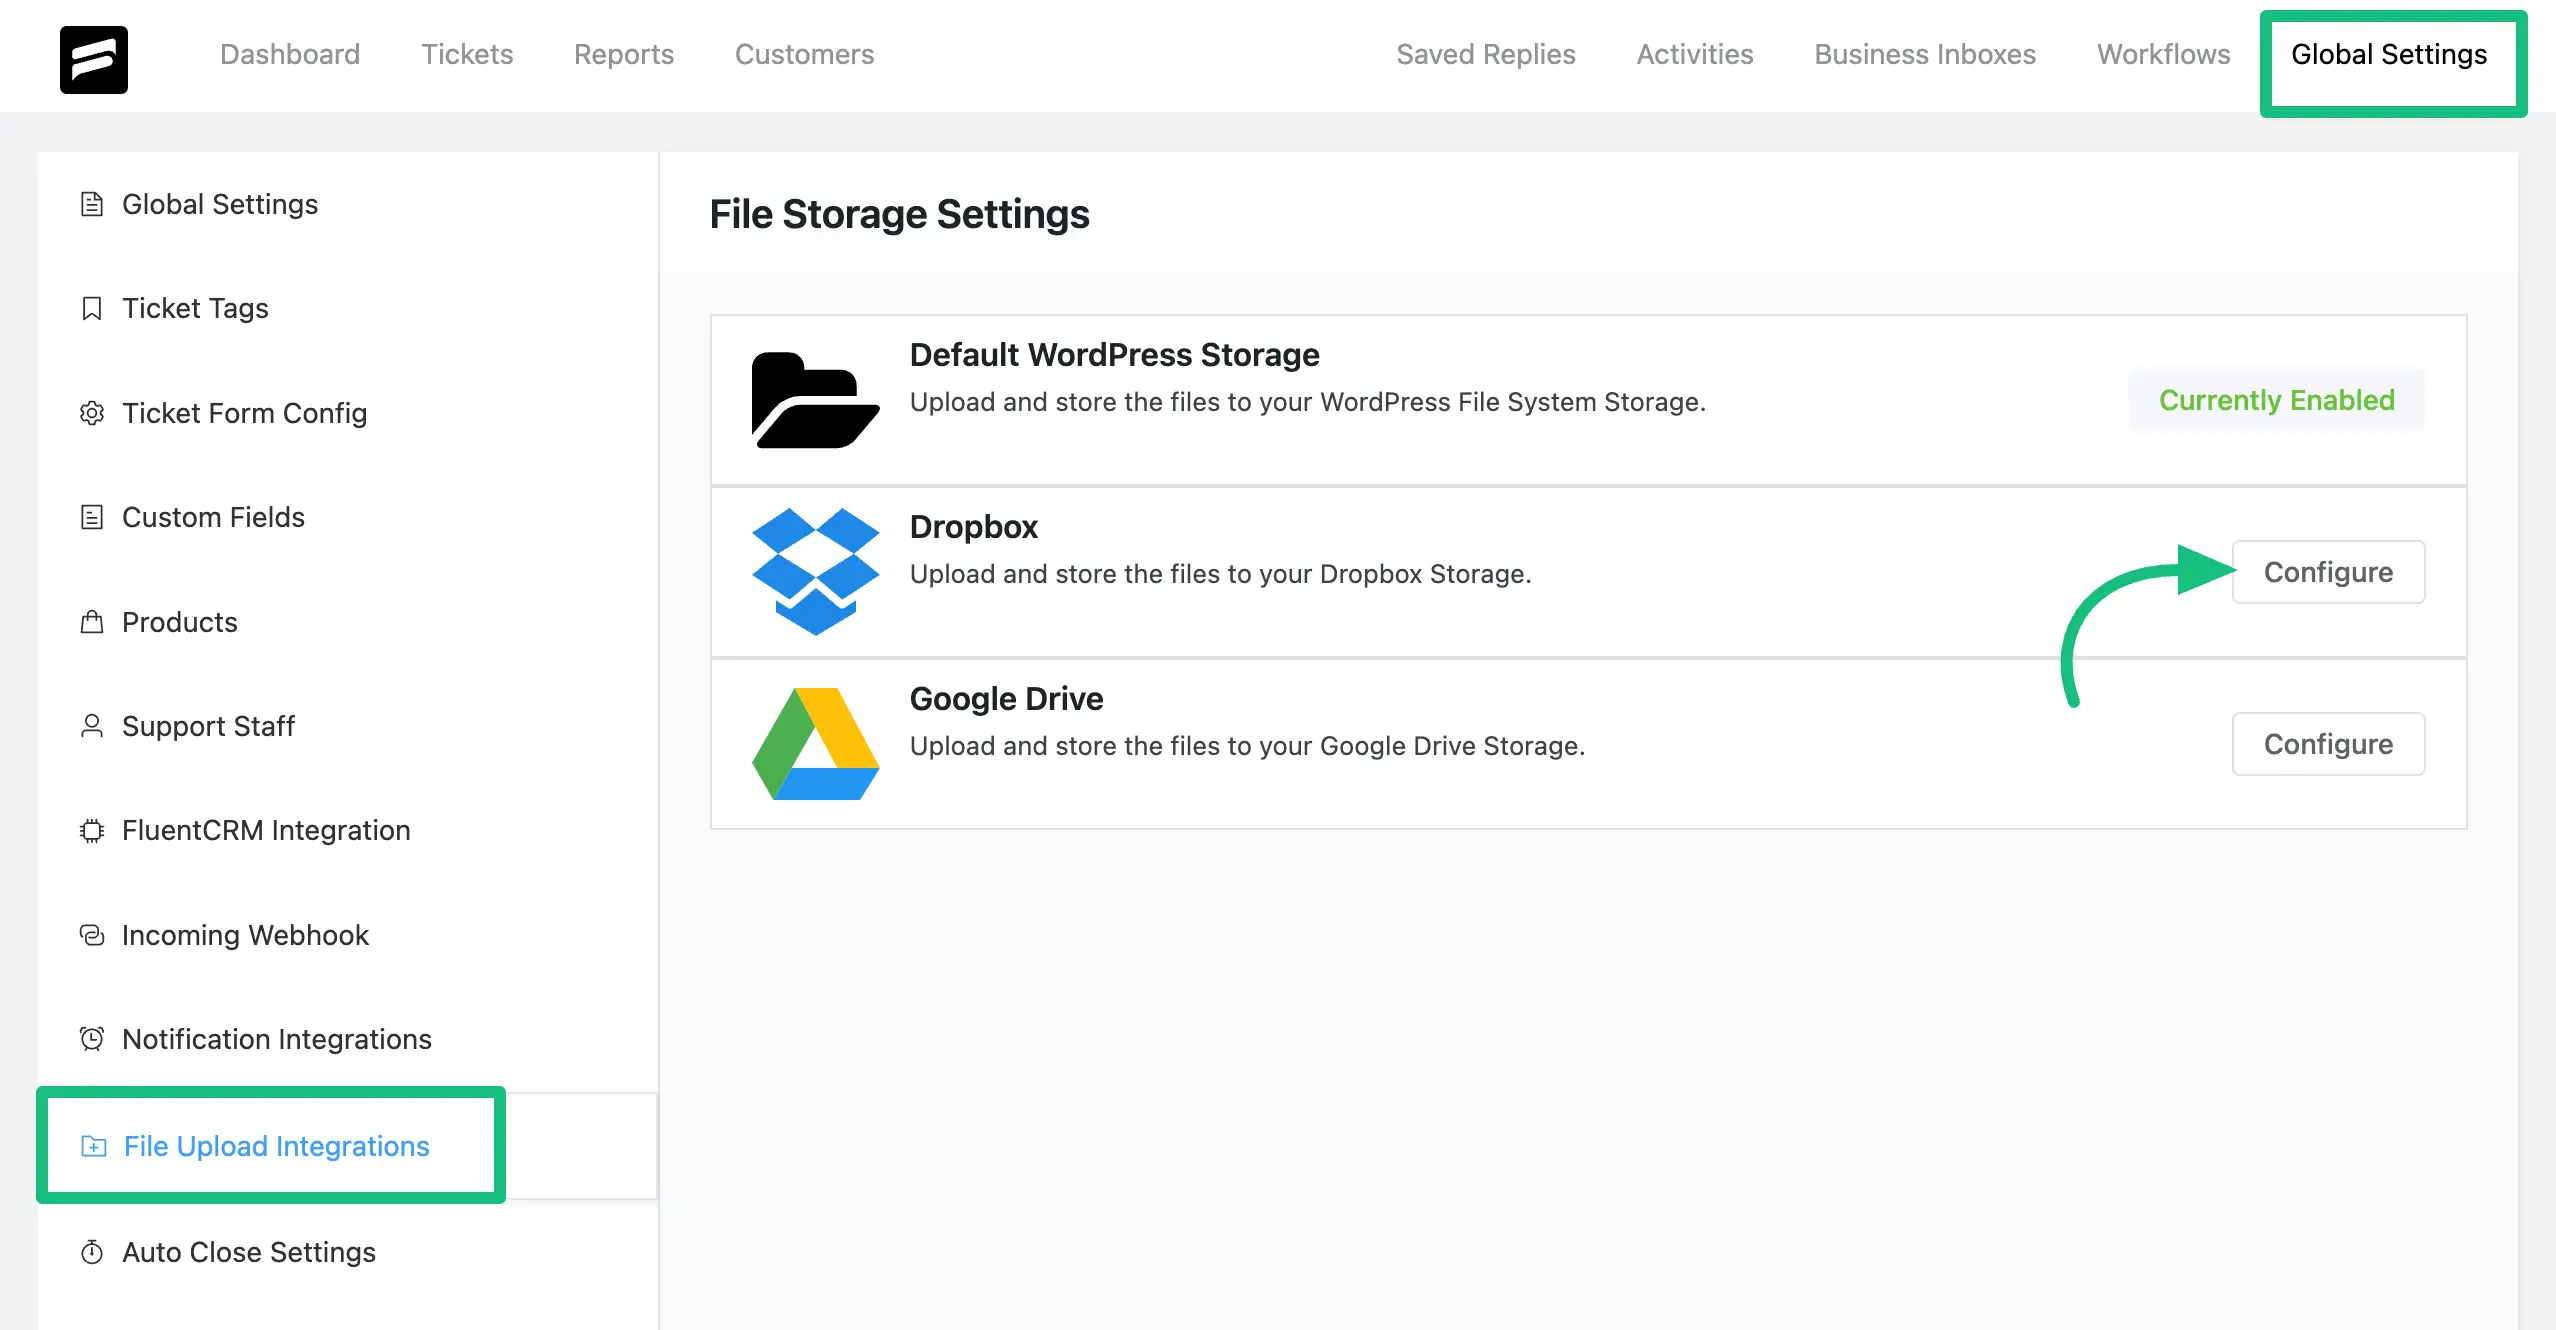 Dropbox Configure option from Fluent Support dashboard